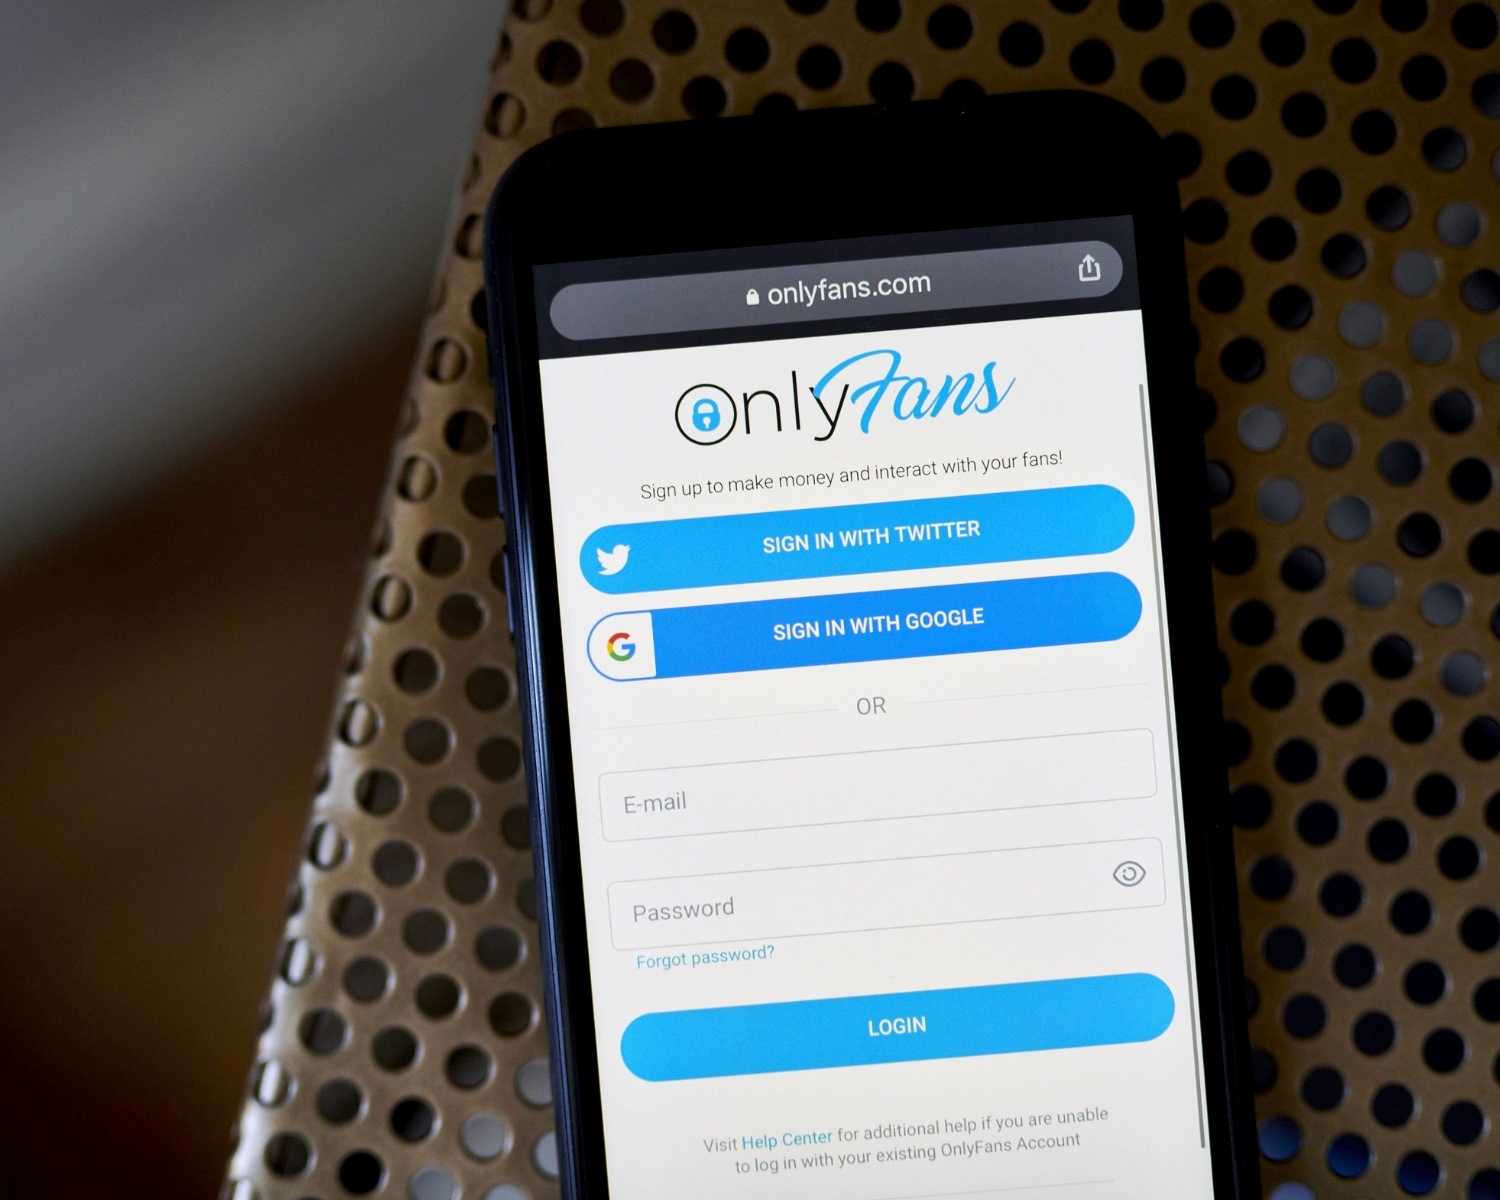 How To Download Videos From Onlyfans On Android